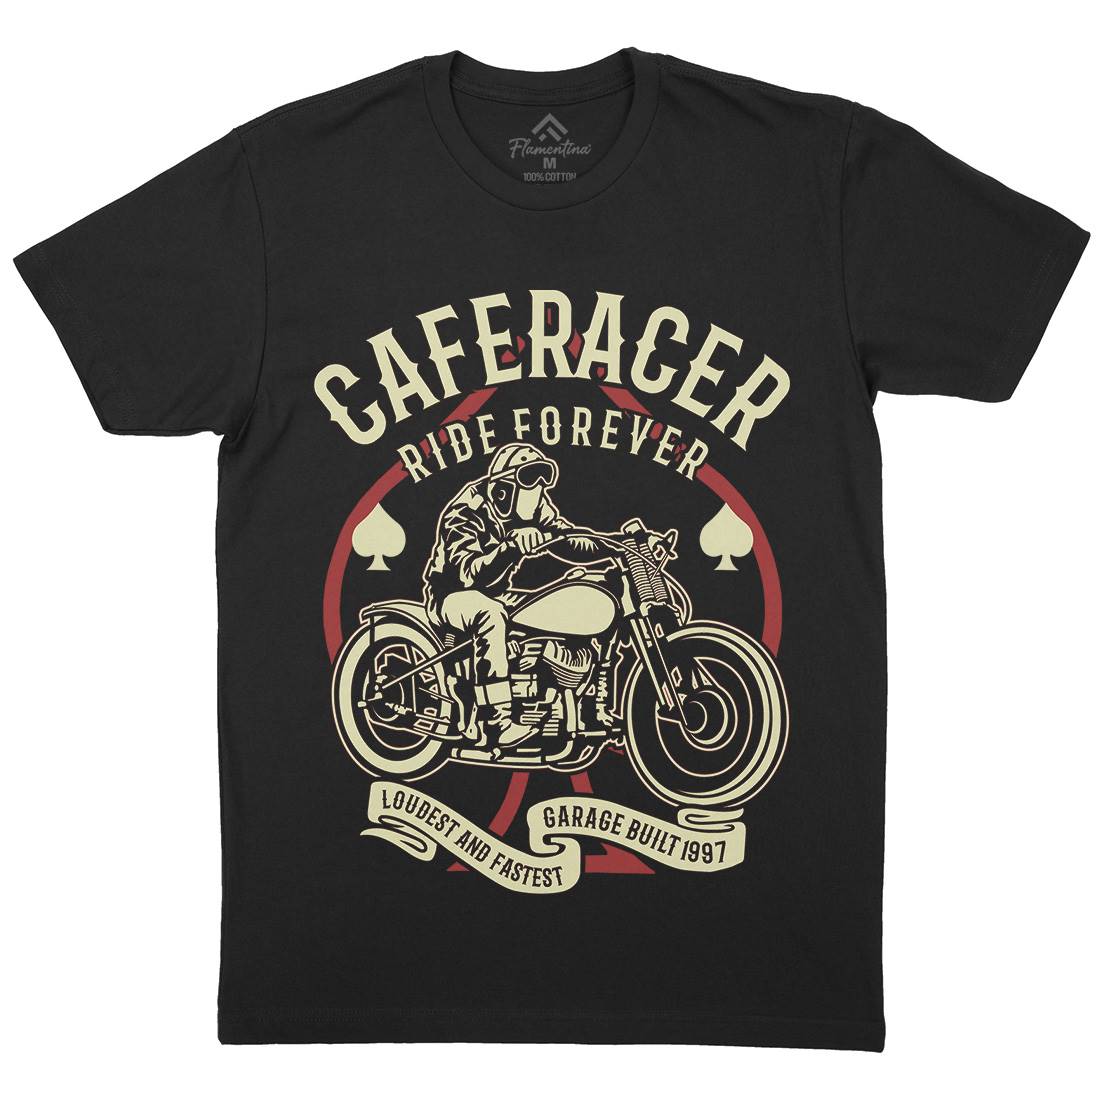 Caferacer Ride Forever Mens Organic Crew Neck T-Shirt Motorcycles B192